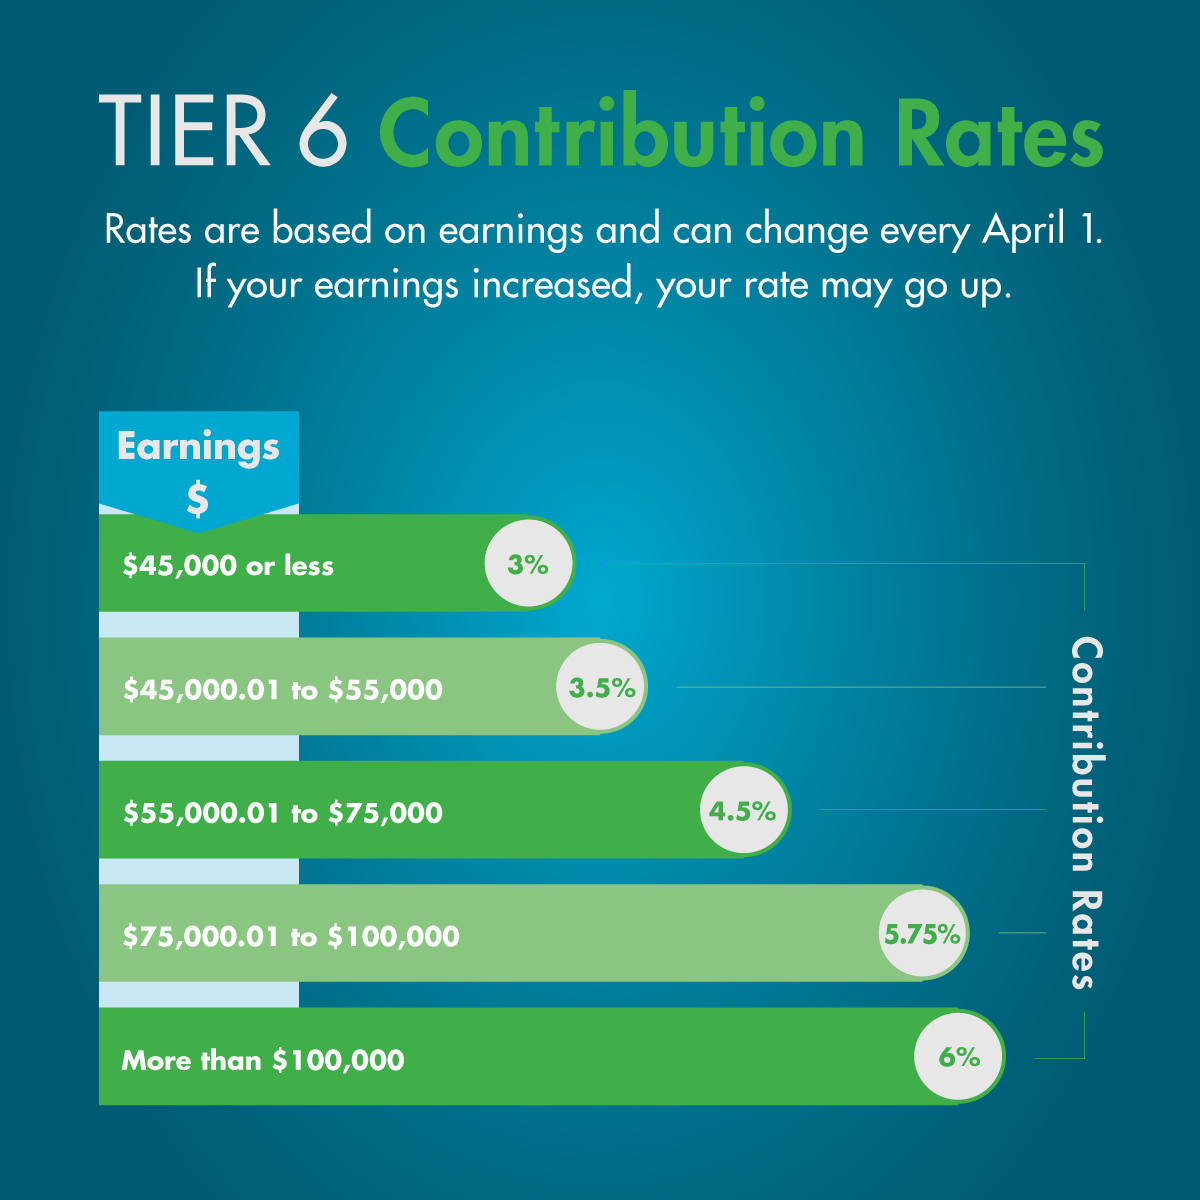 Tier 6 contribution rates